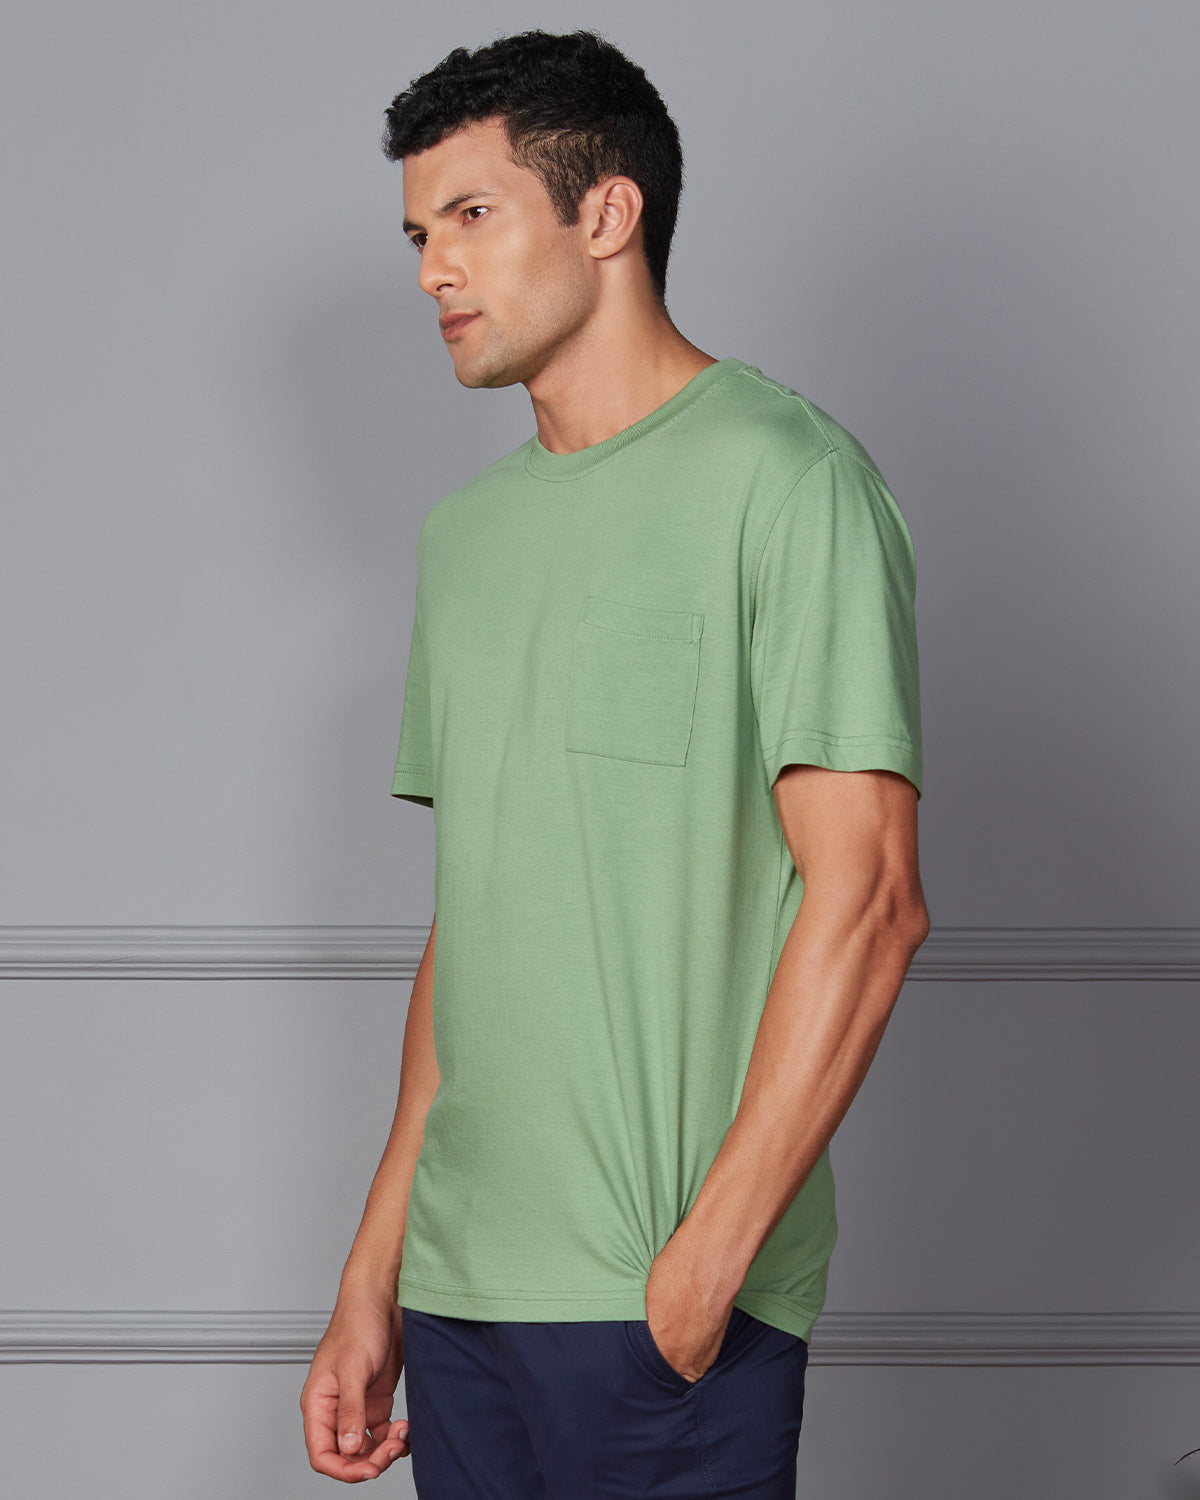 cityof_ - Luxe Square Pocket T-Shirt